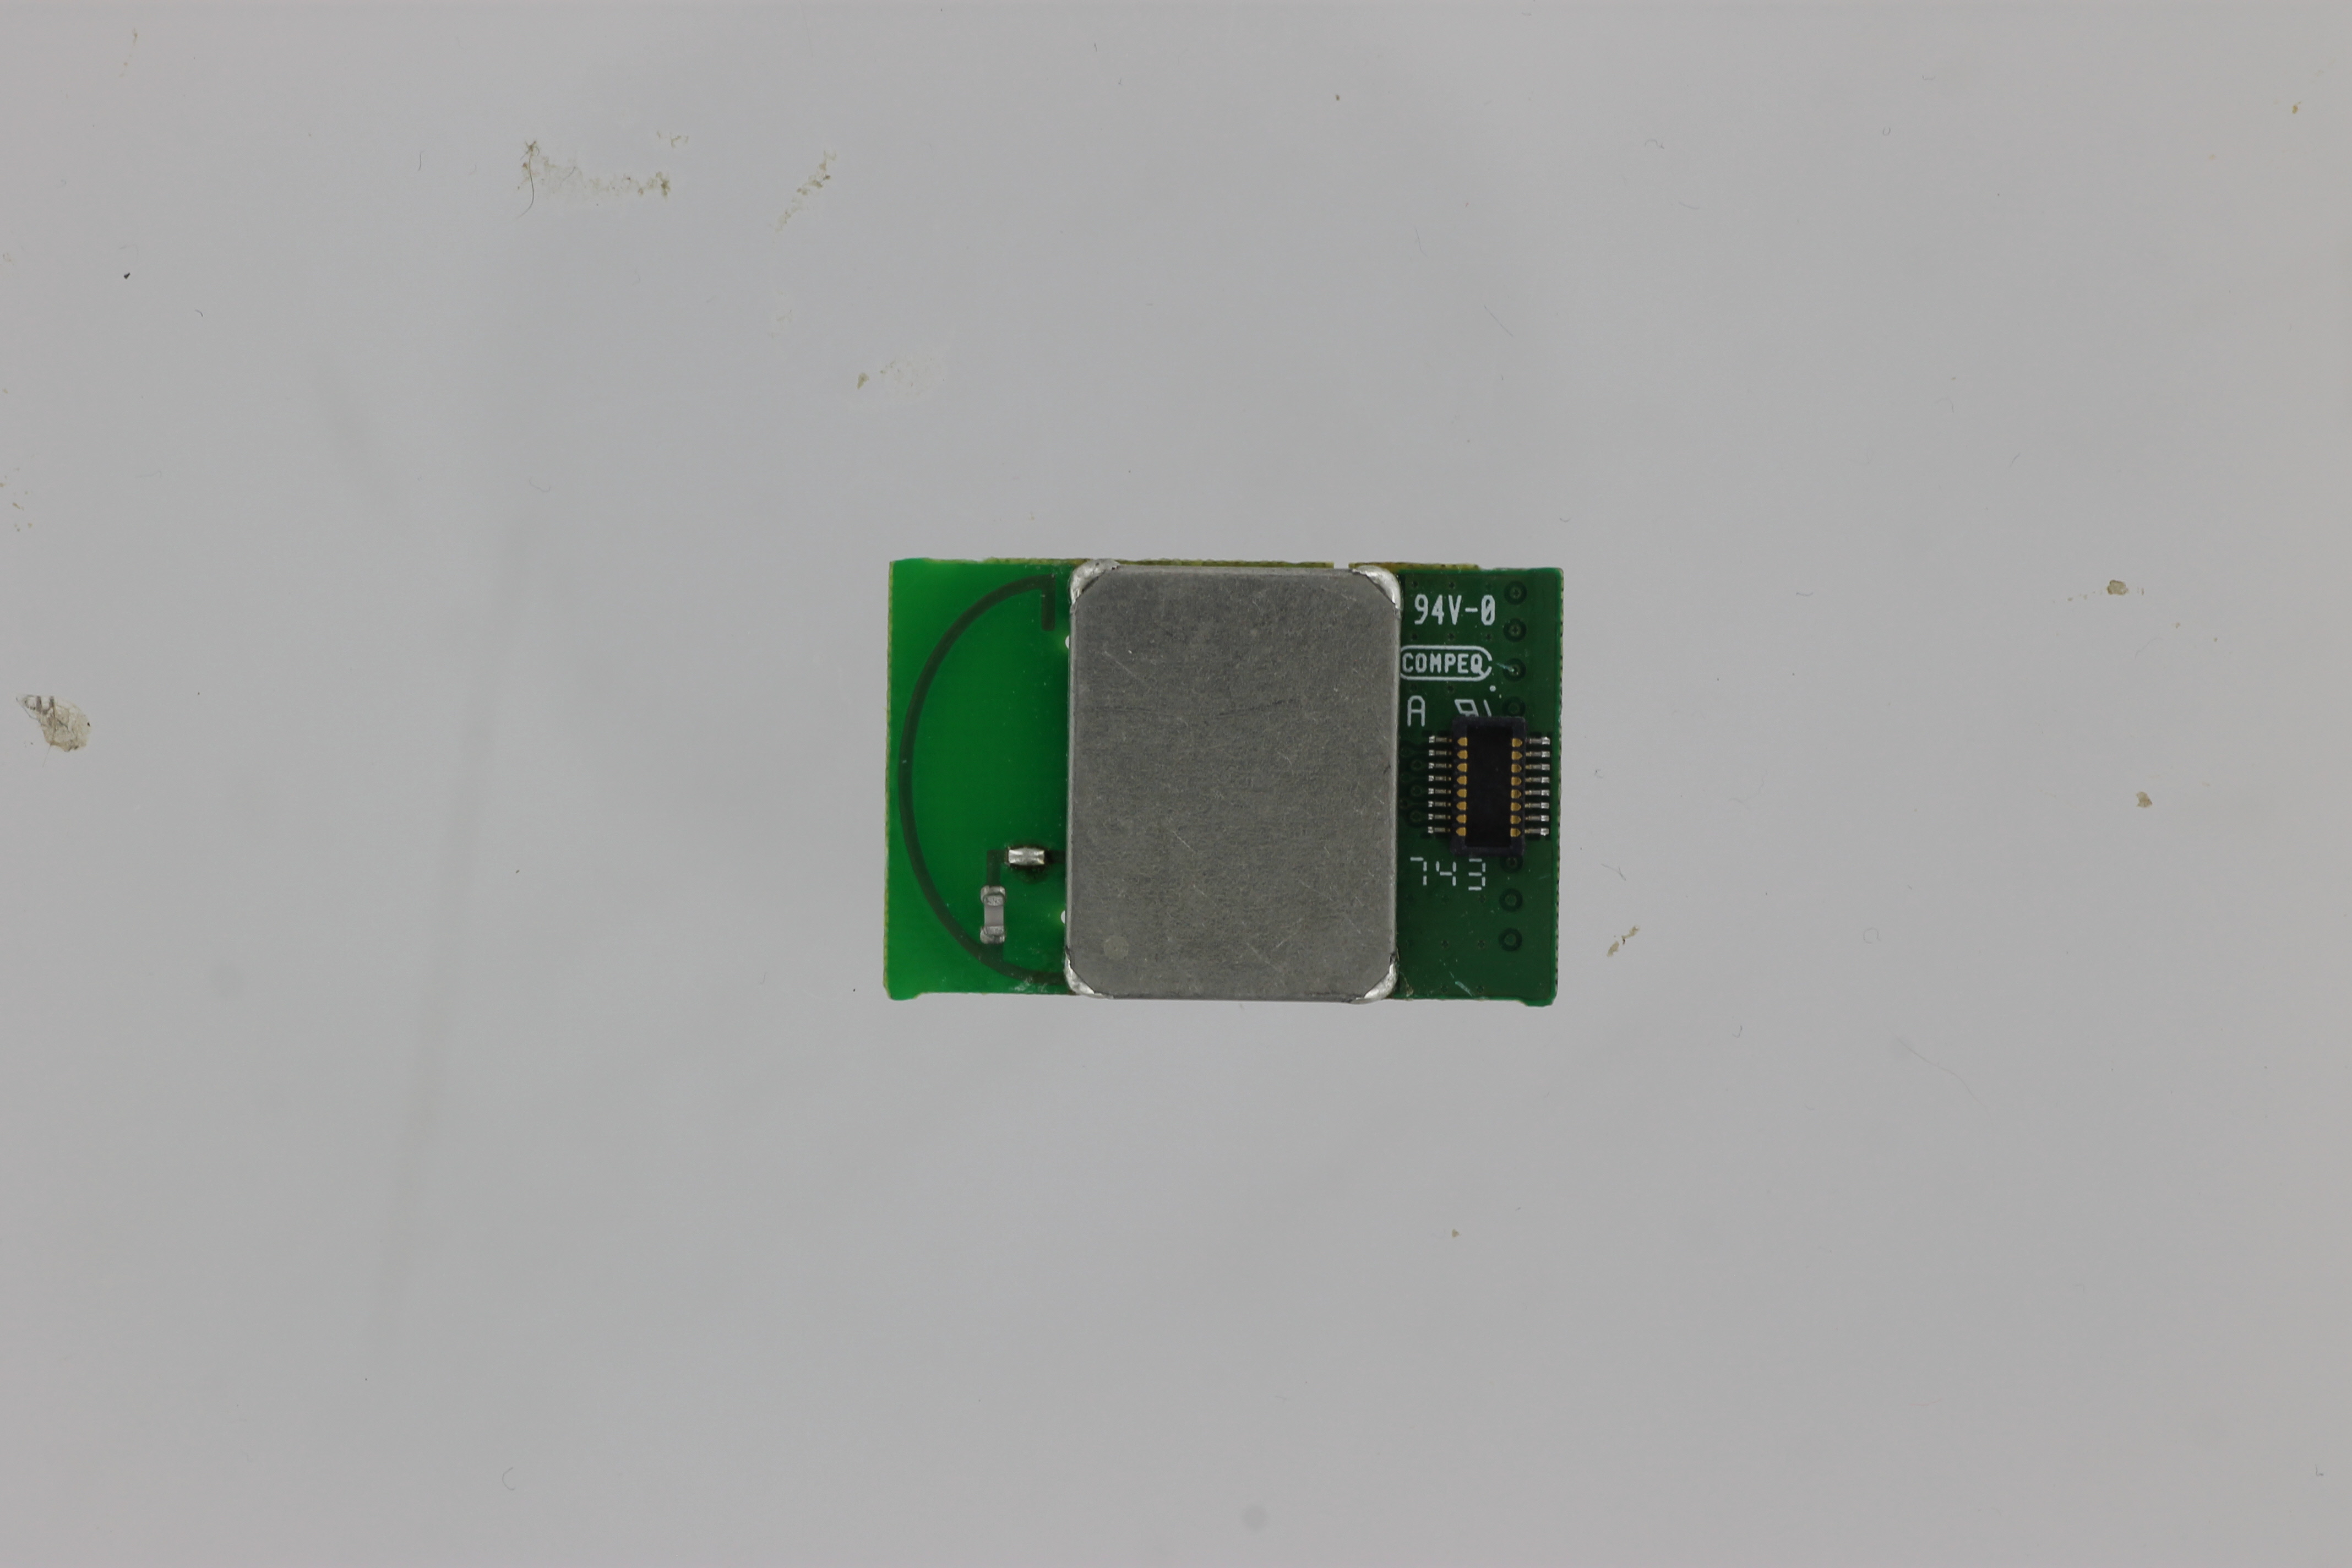 Buy Zedlabz Replacement Bluetooth Card Module Pcb Board For Nintendo Wii